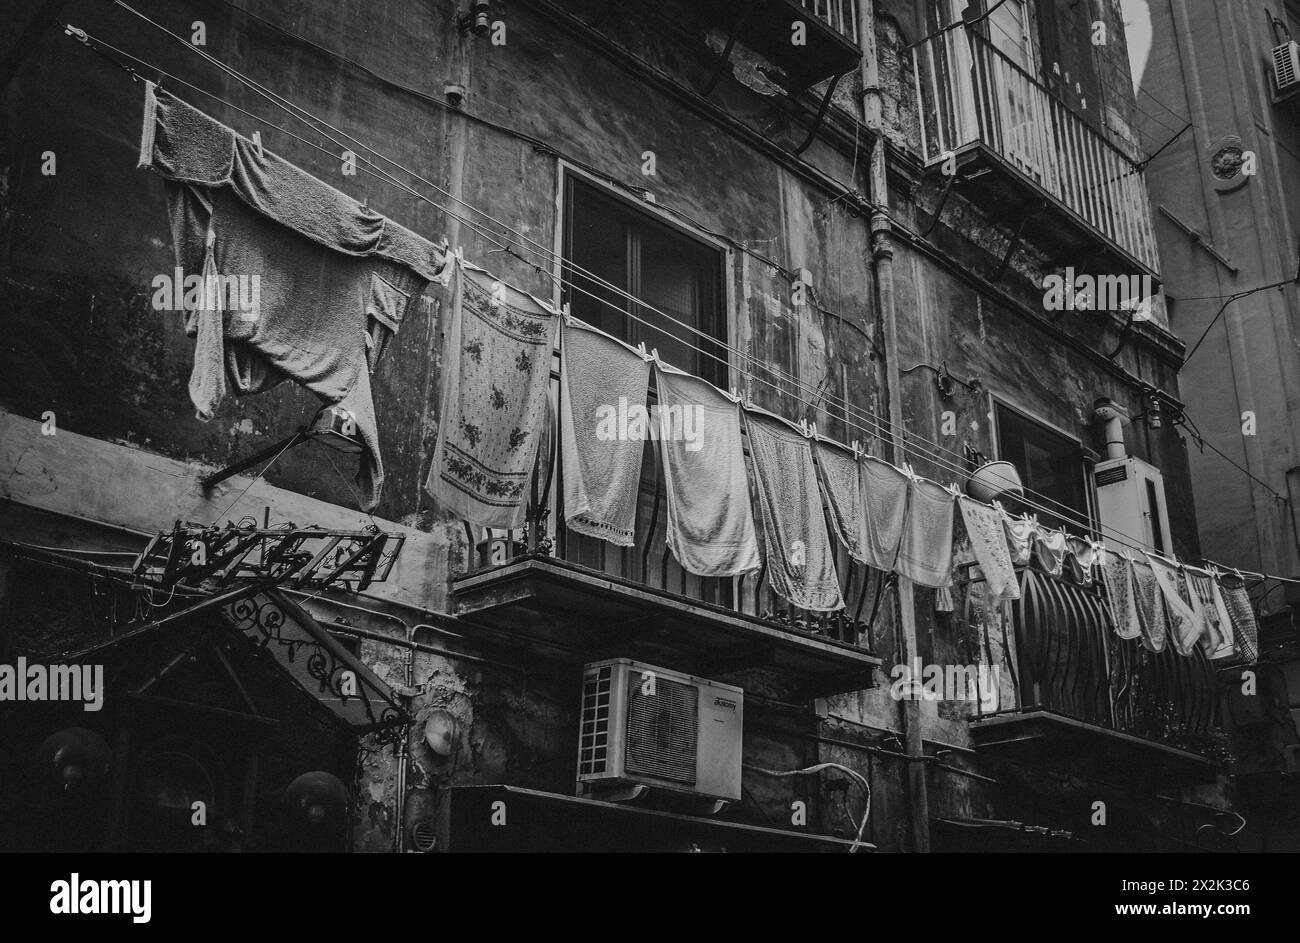 A monochrome photo capturing an old neighborhood with hanging laundry across narrow buildings, bringing a sense of community and daily life in an urba Stock Photo